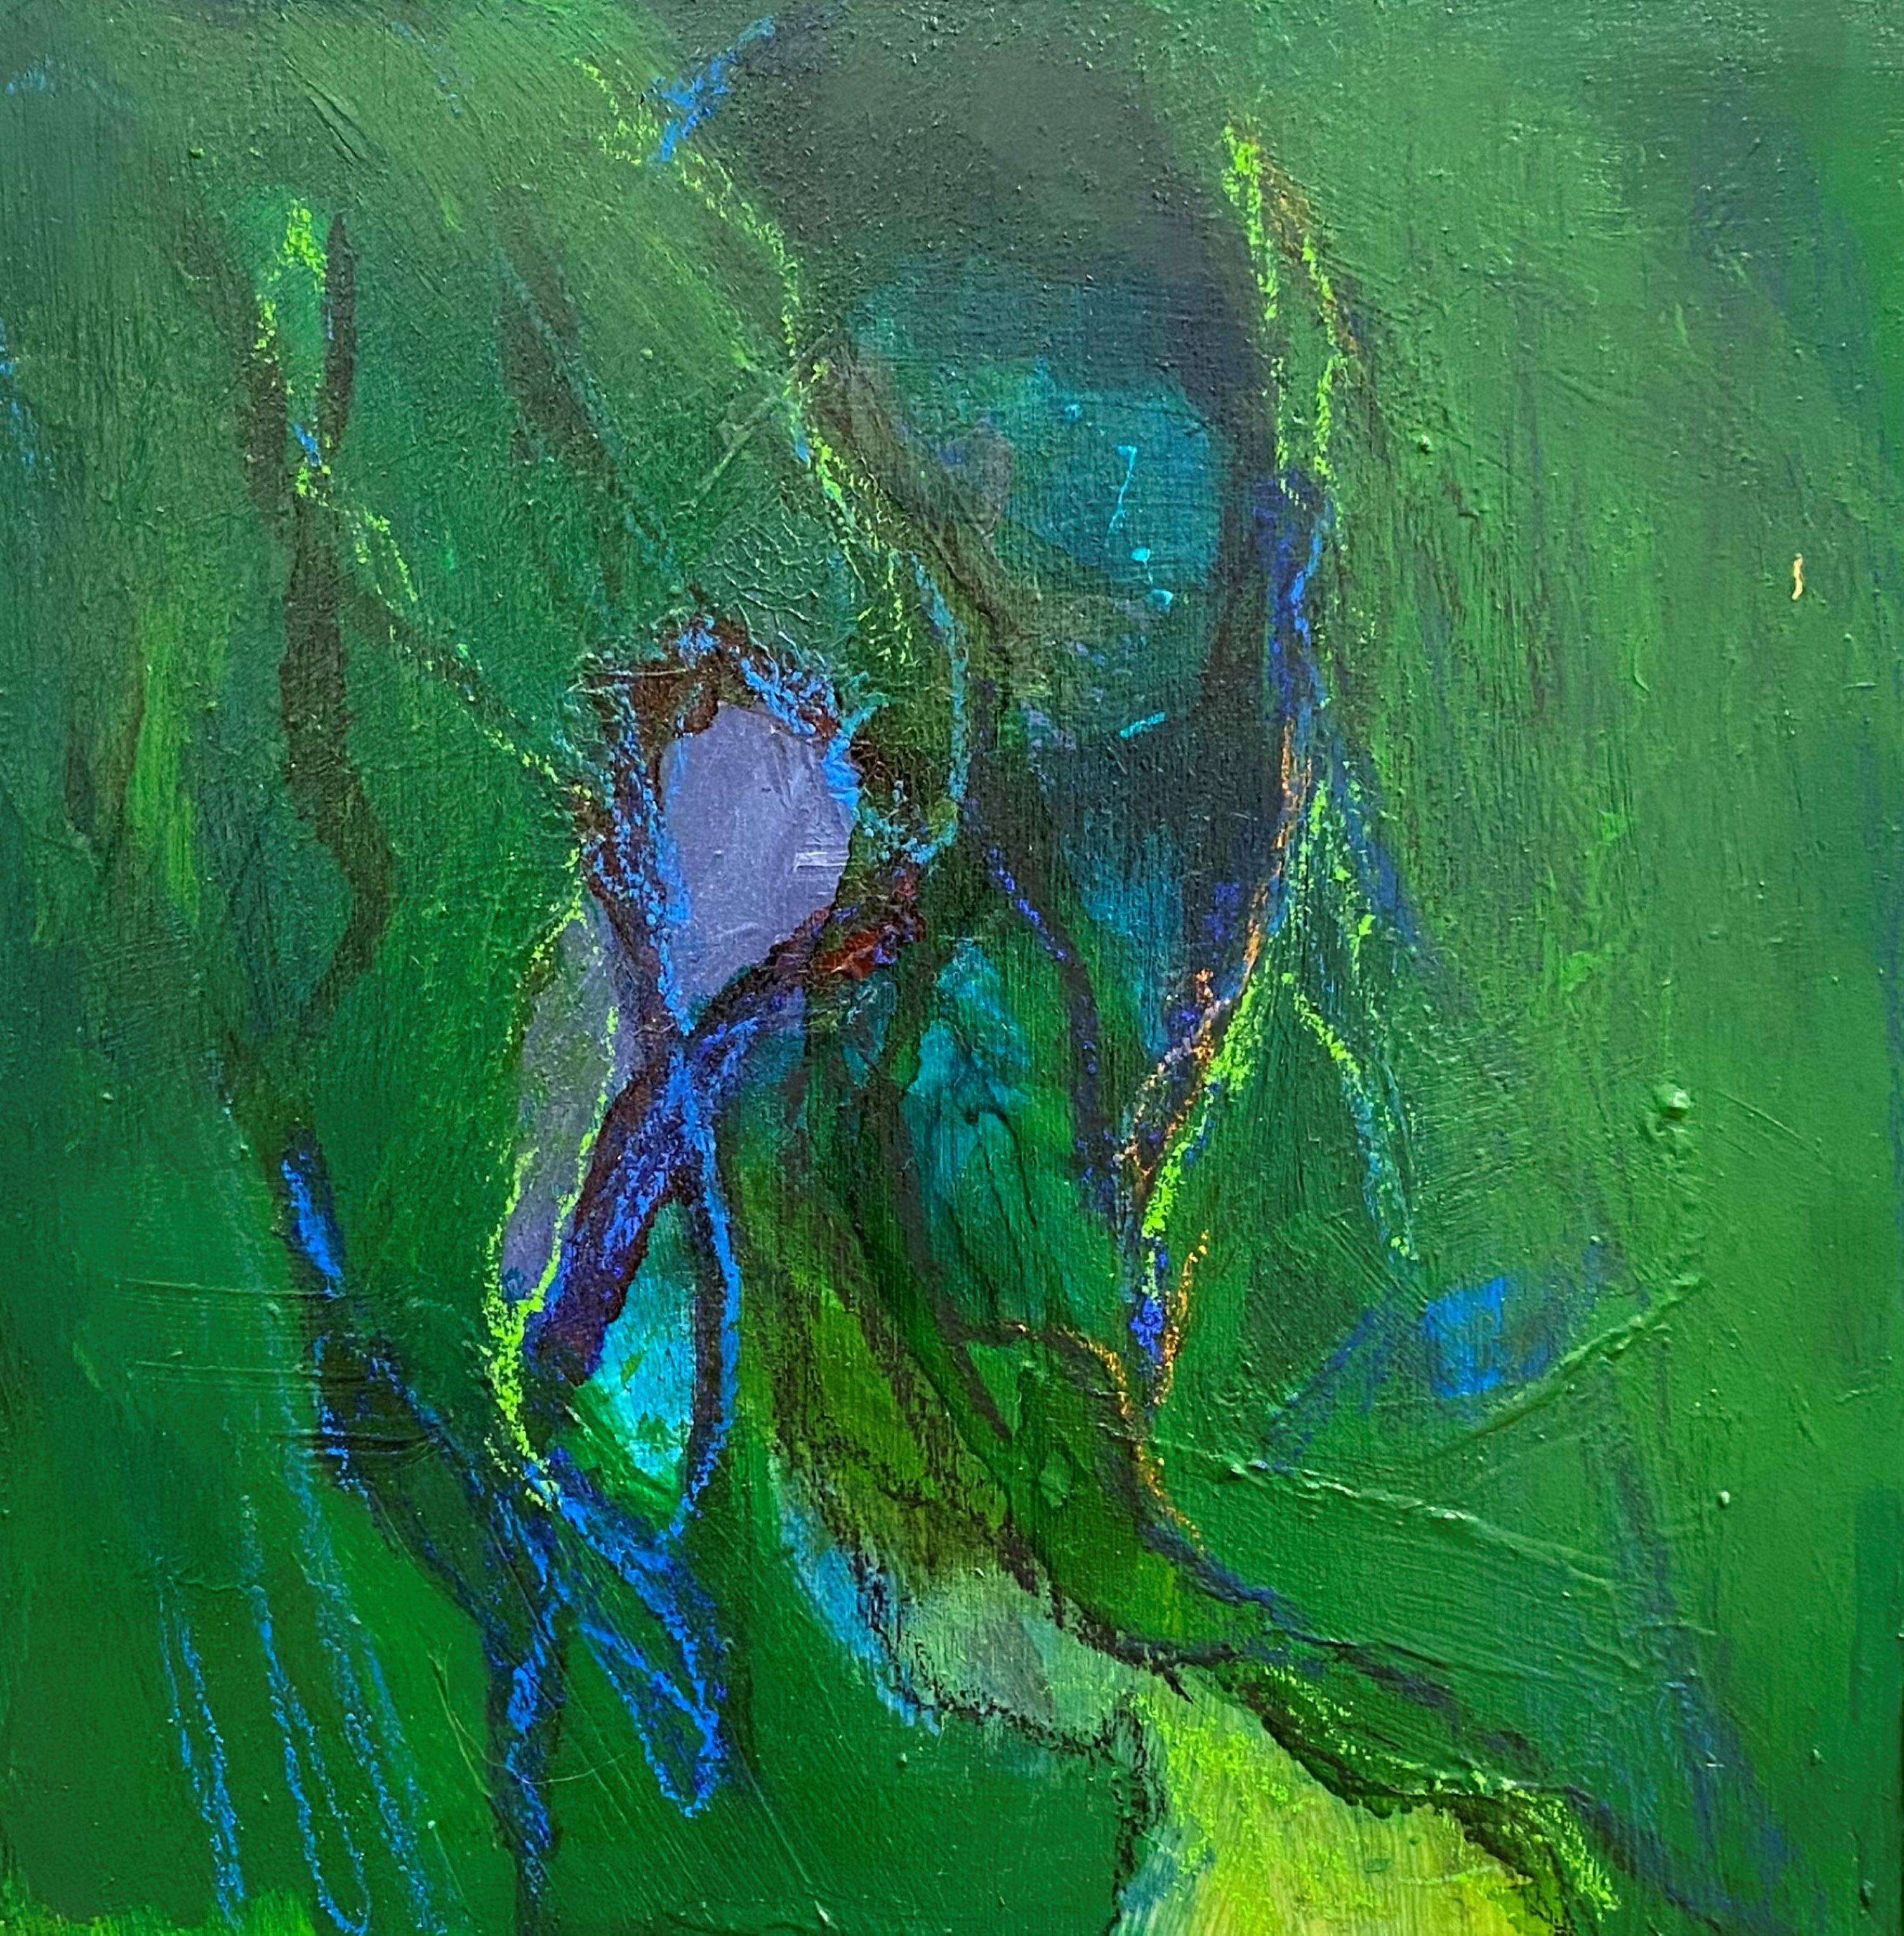 Drifting, Original Contemporary Green Abstract Square Mixed Media Painting
8" x 8" x 2" (HxWxD) Acrylic, Ink, Soft Pastels, Oil Pastels, and Charcoal on Wood Panel

This small format work is one of four square abstract paintings on panel created by